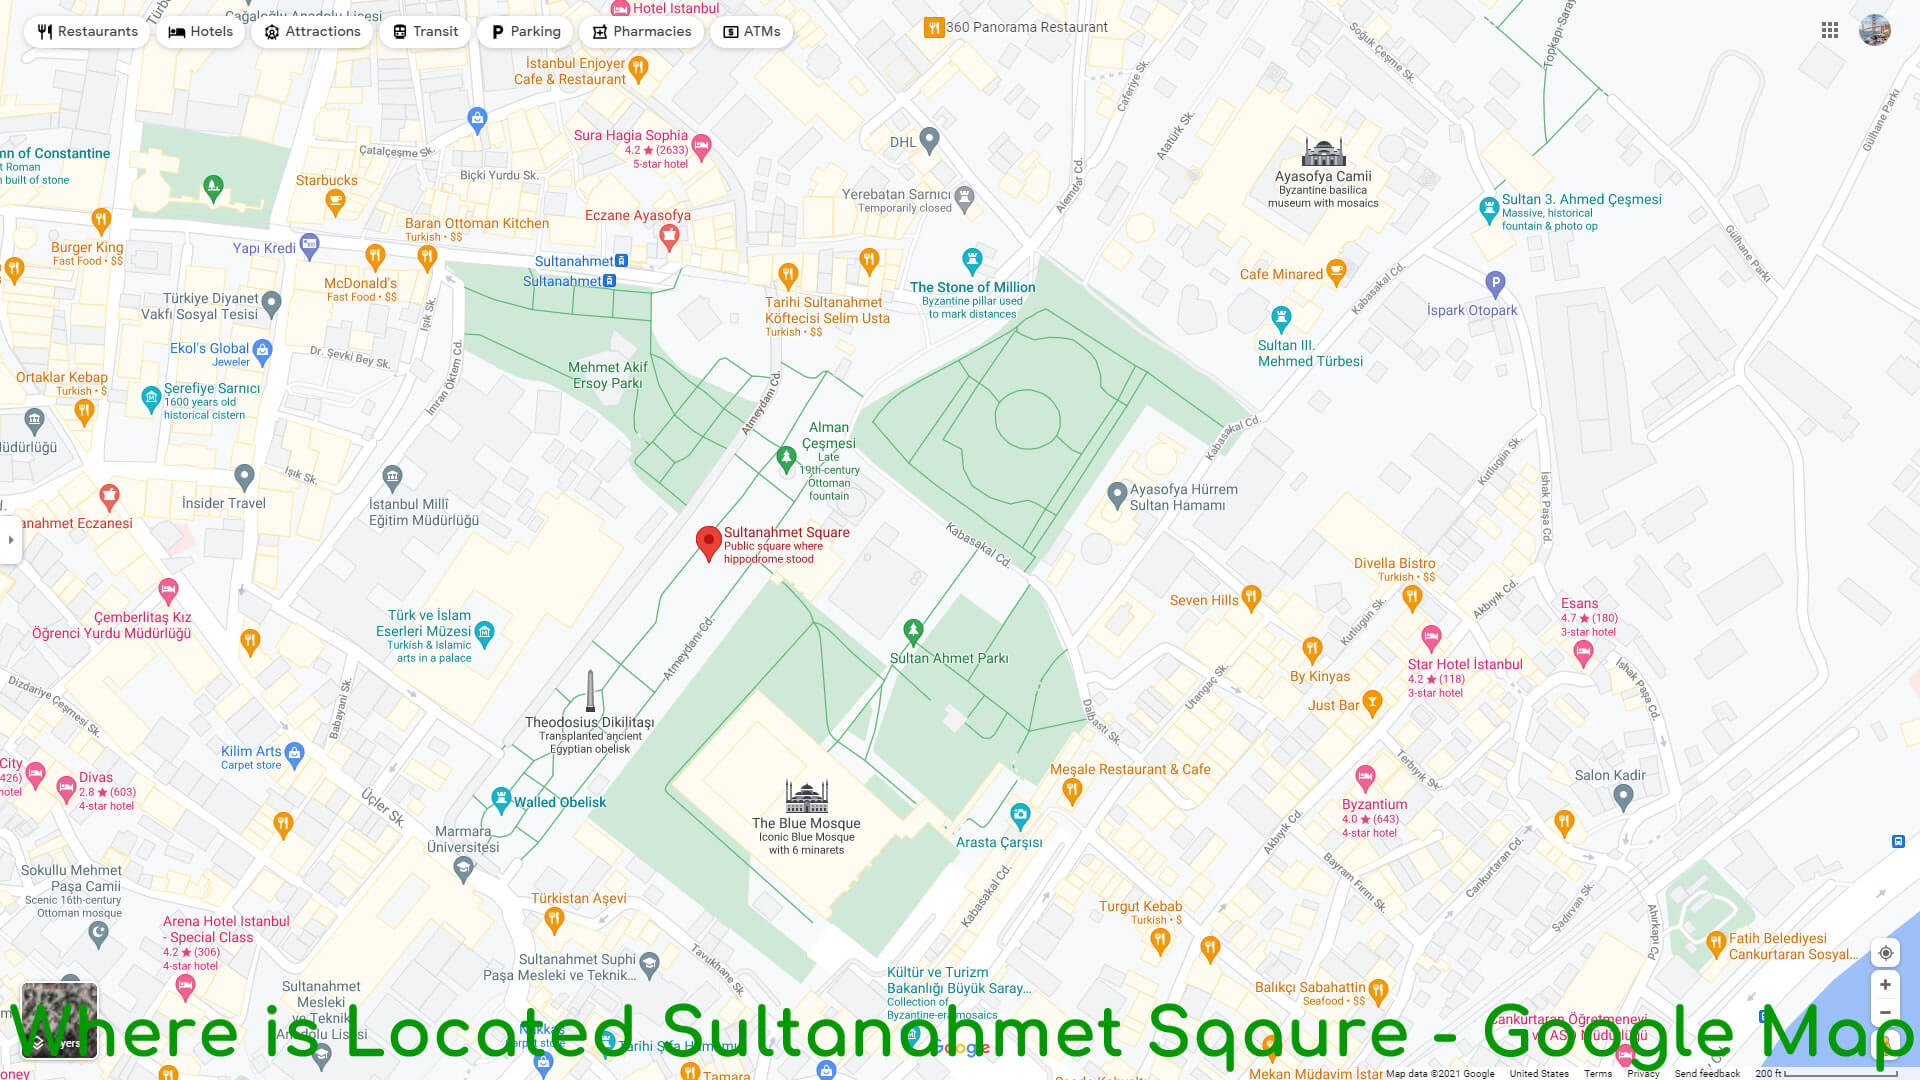 Where is Located Sultanahmet Sqaure - Google Map